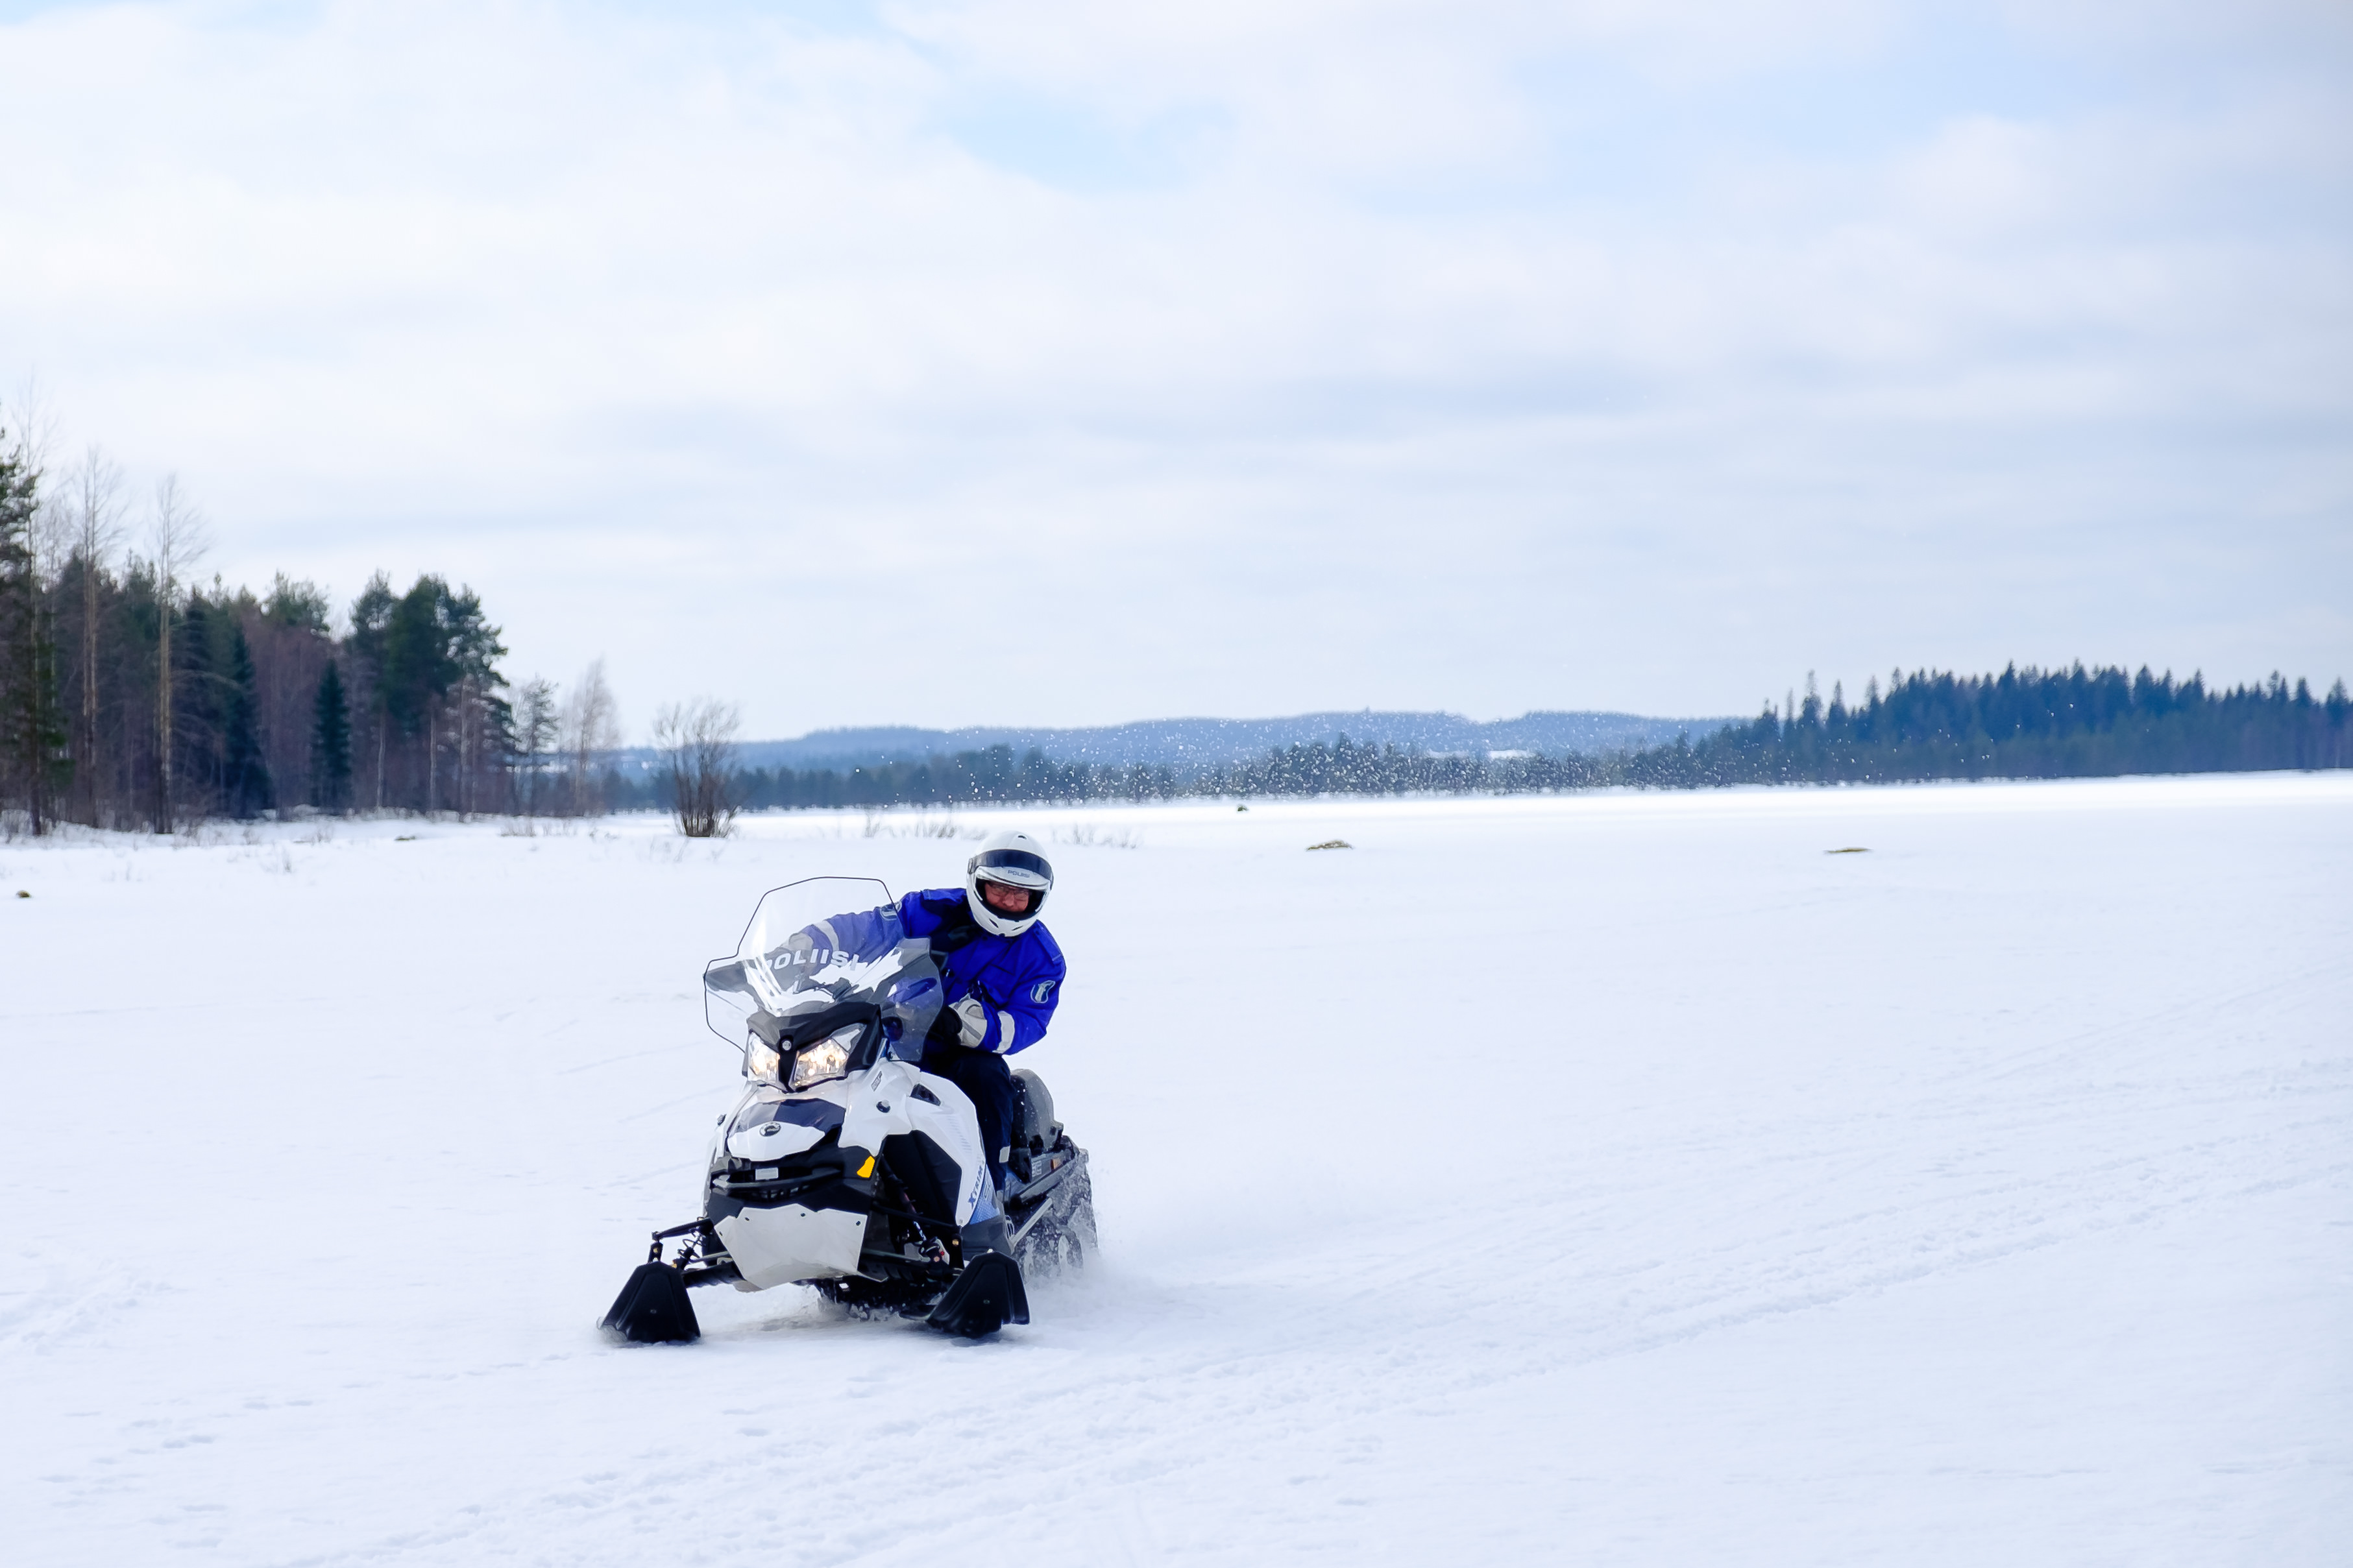 A police officer is riding a snowmobile on snowy terrain, possibly on the ice of a lake.